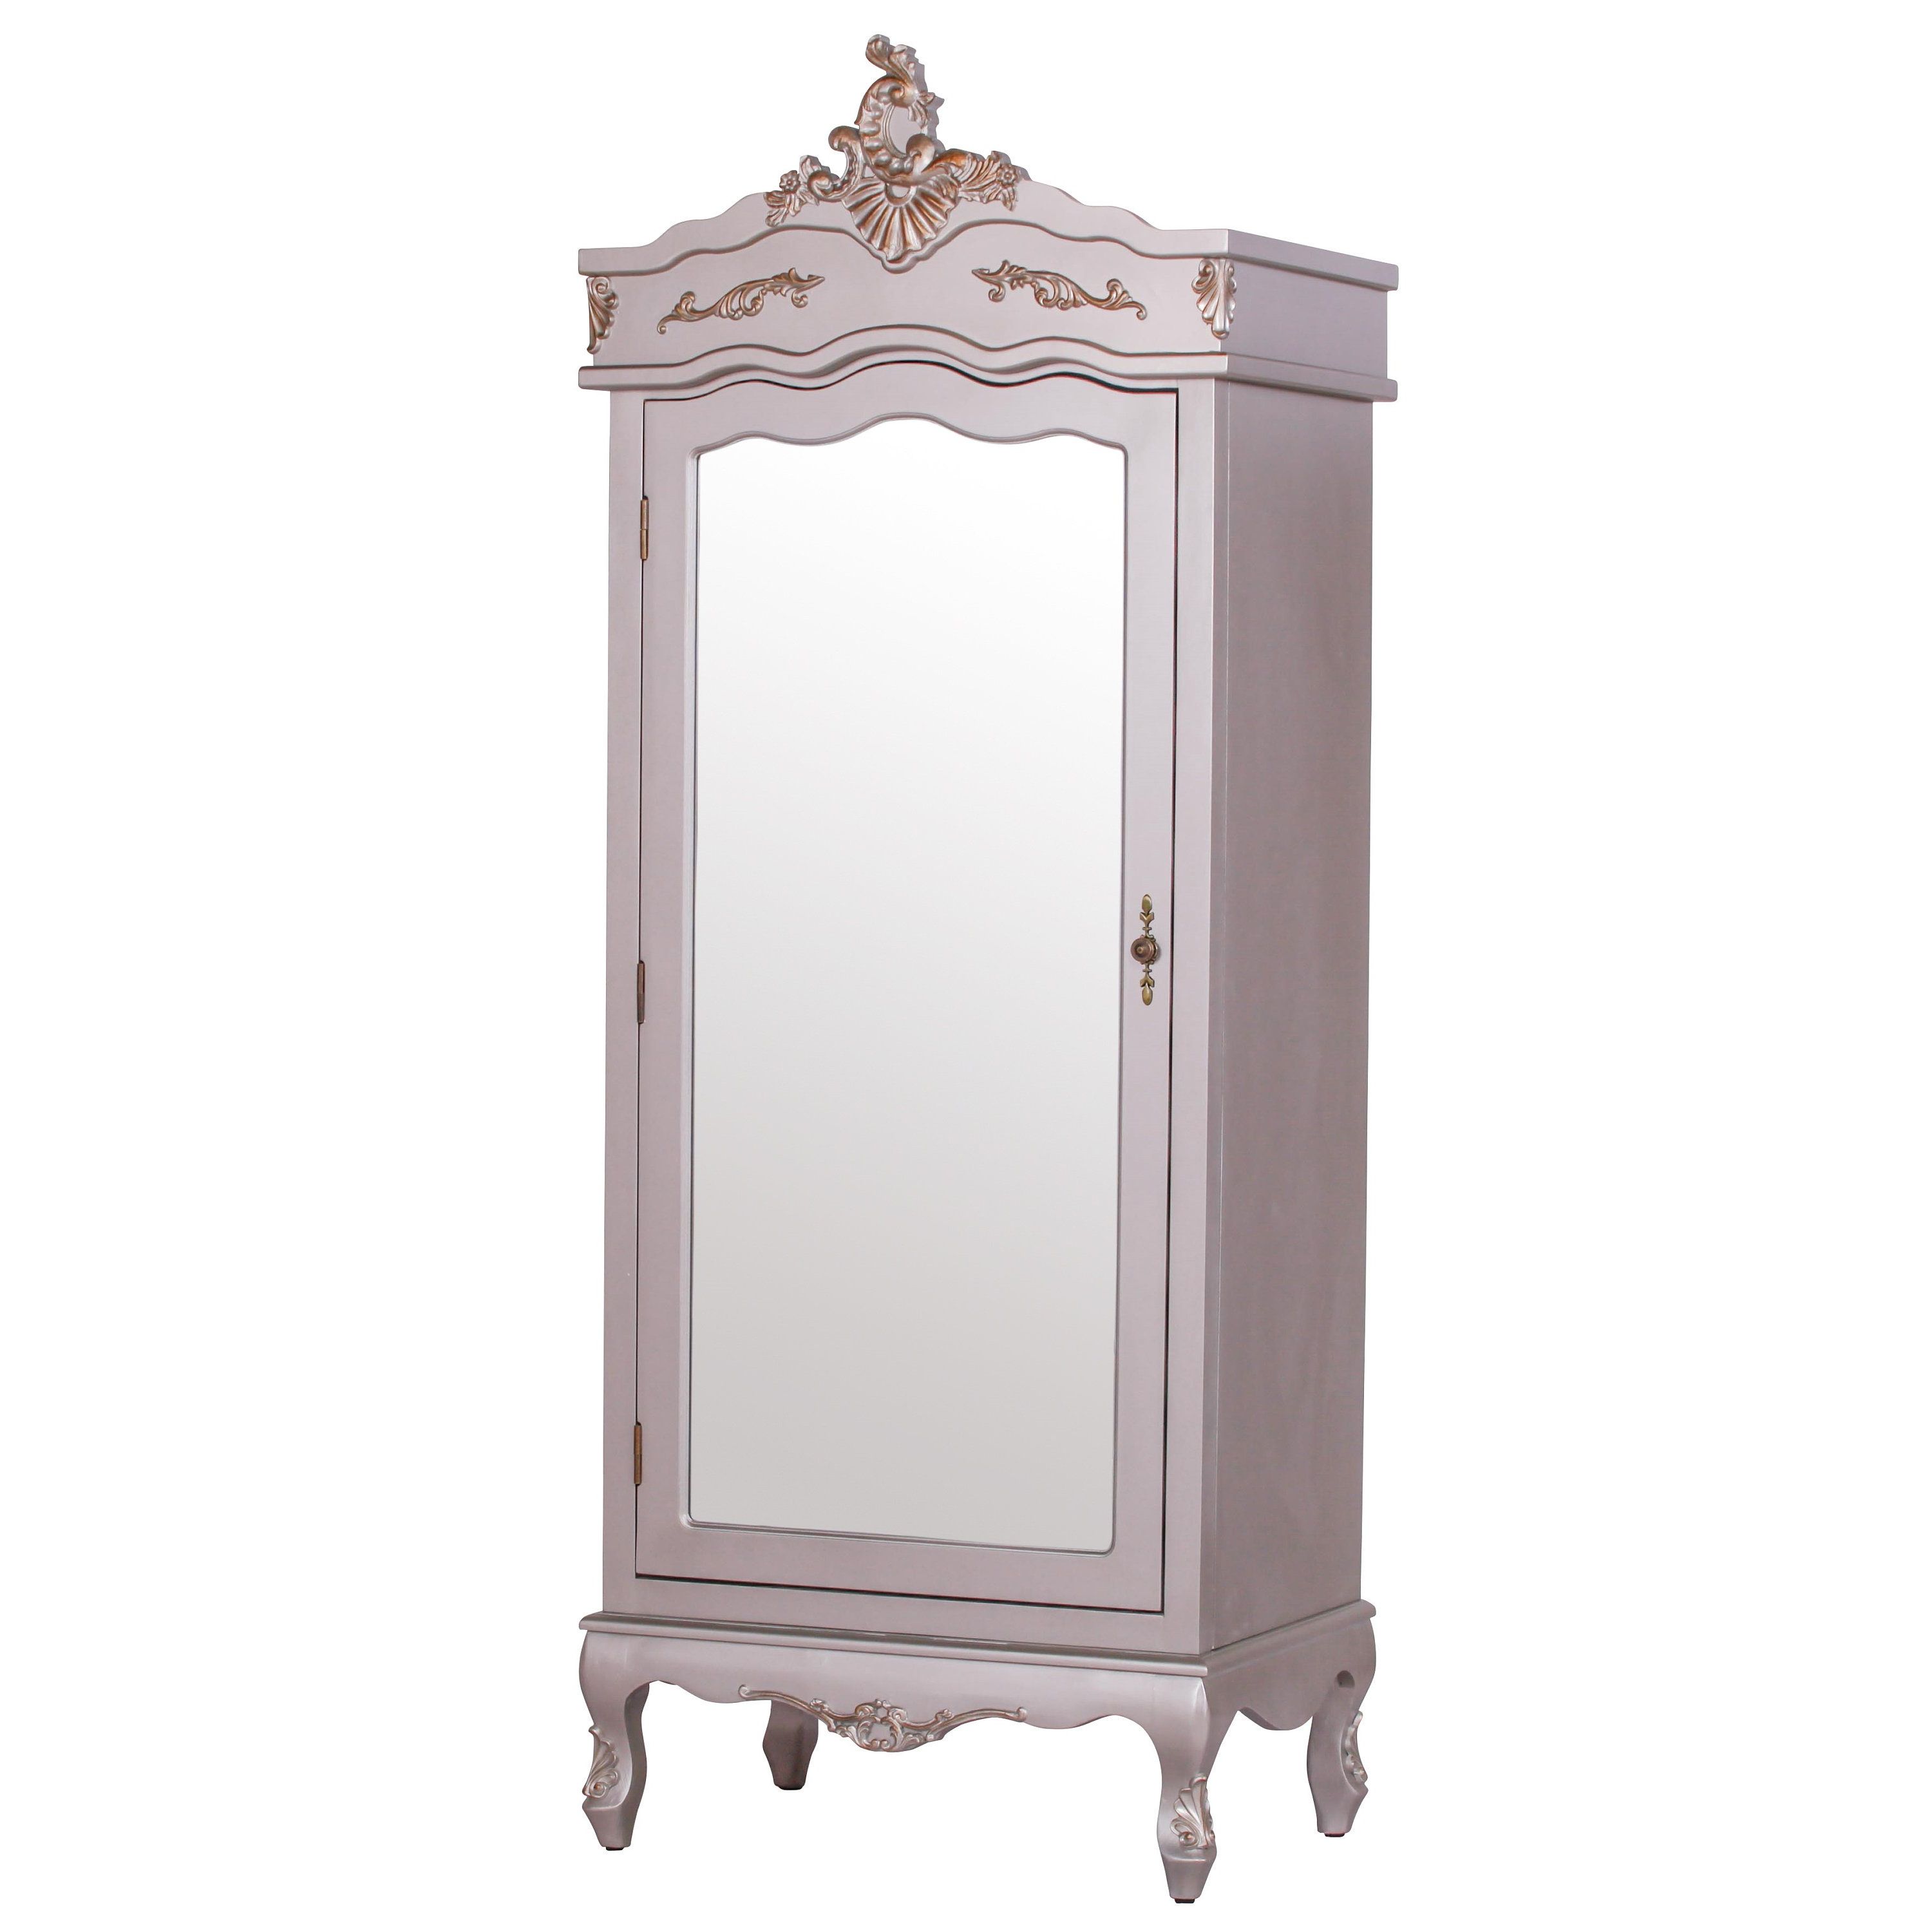 Antique French Style Full Mirror Single Door Armoire Wardrobe – Etsy Uk With Regard To Single French Wardrobes (Gallery 11 of 20)